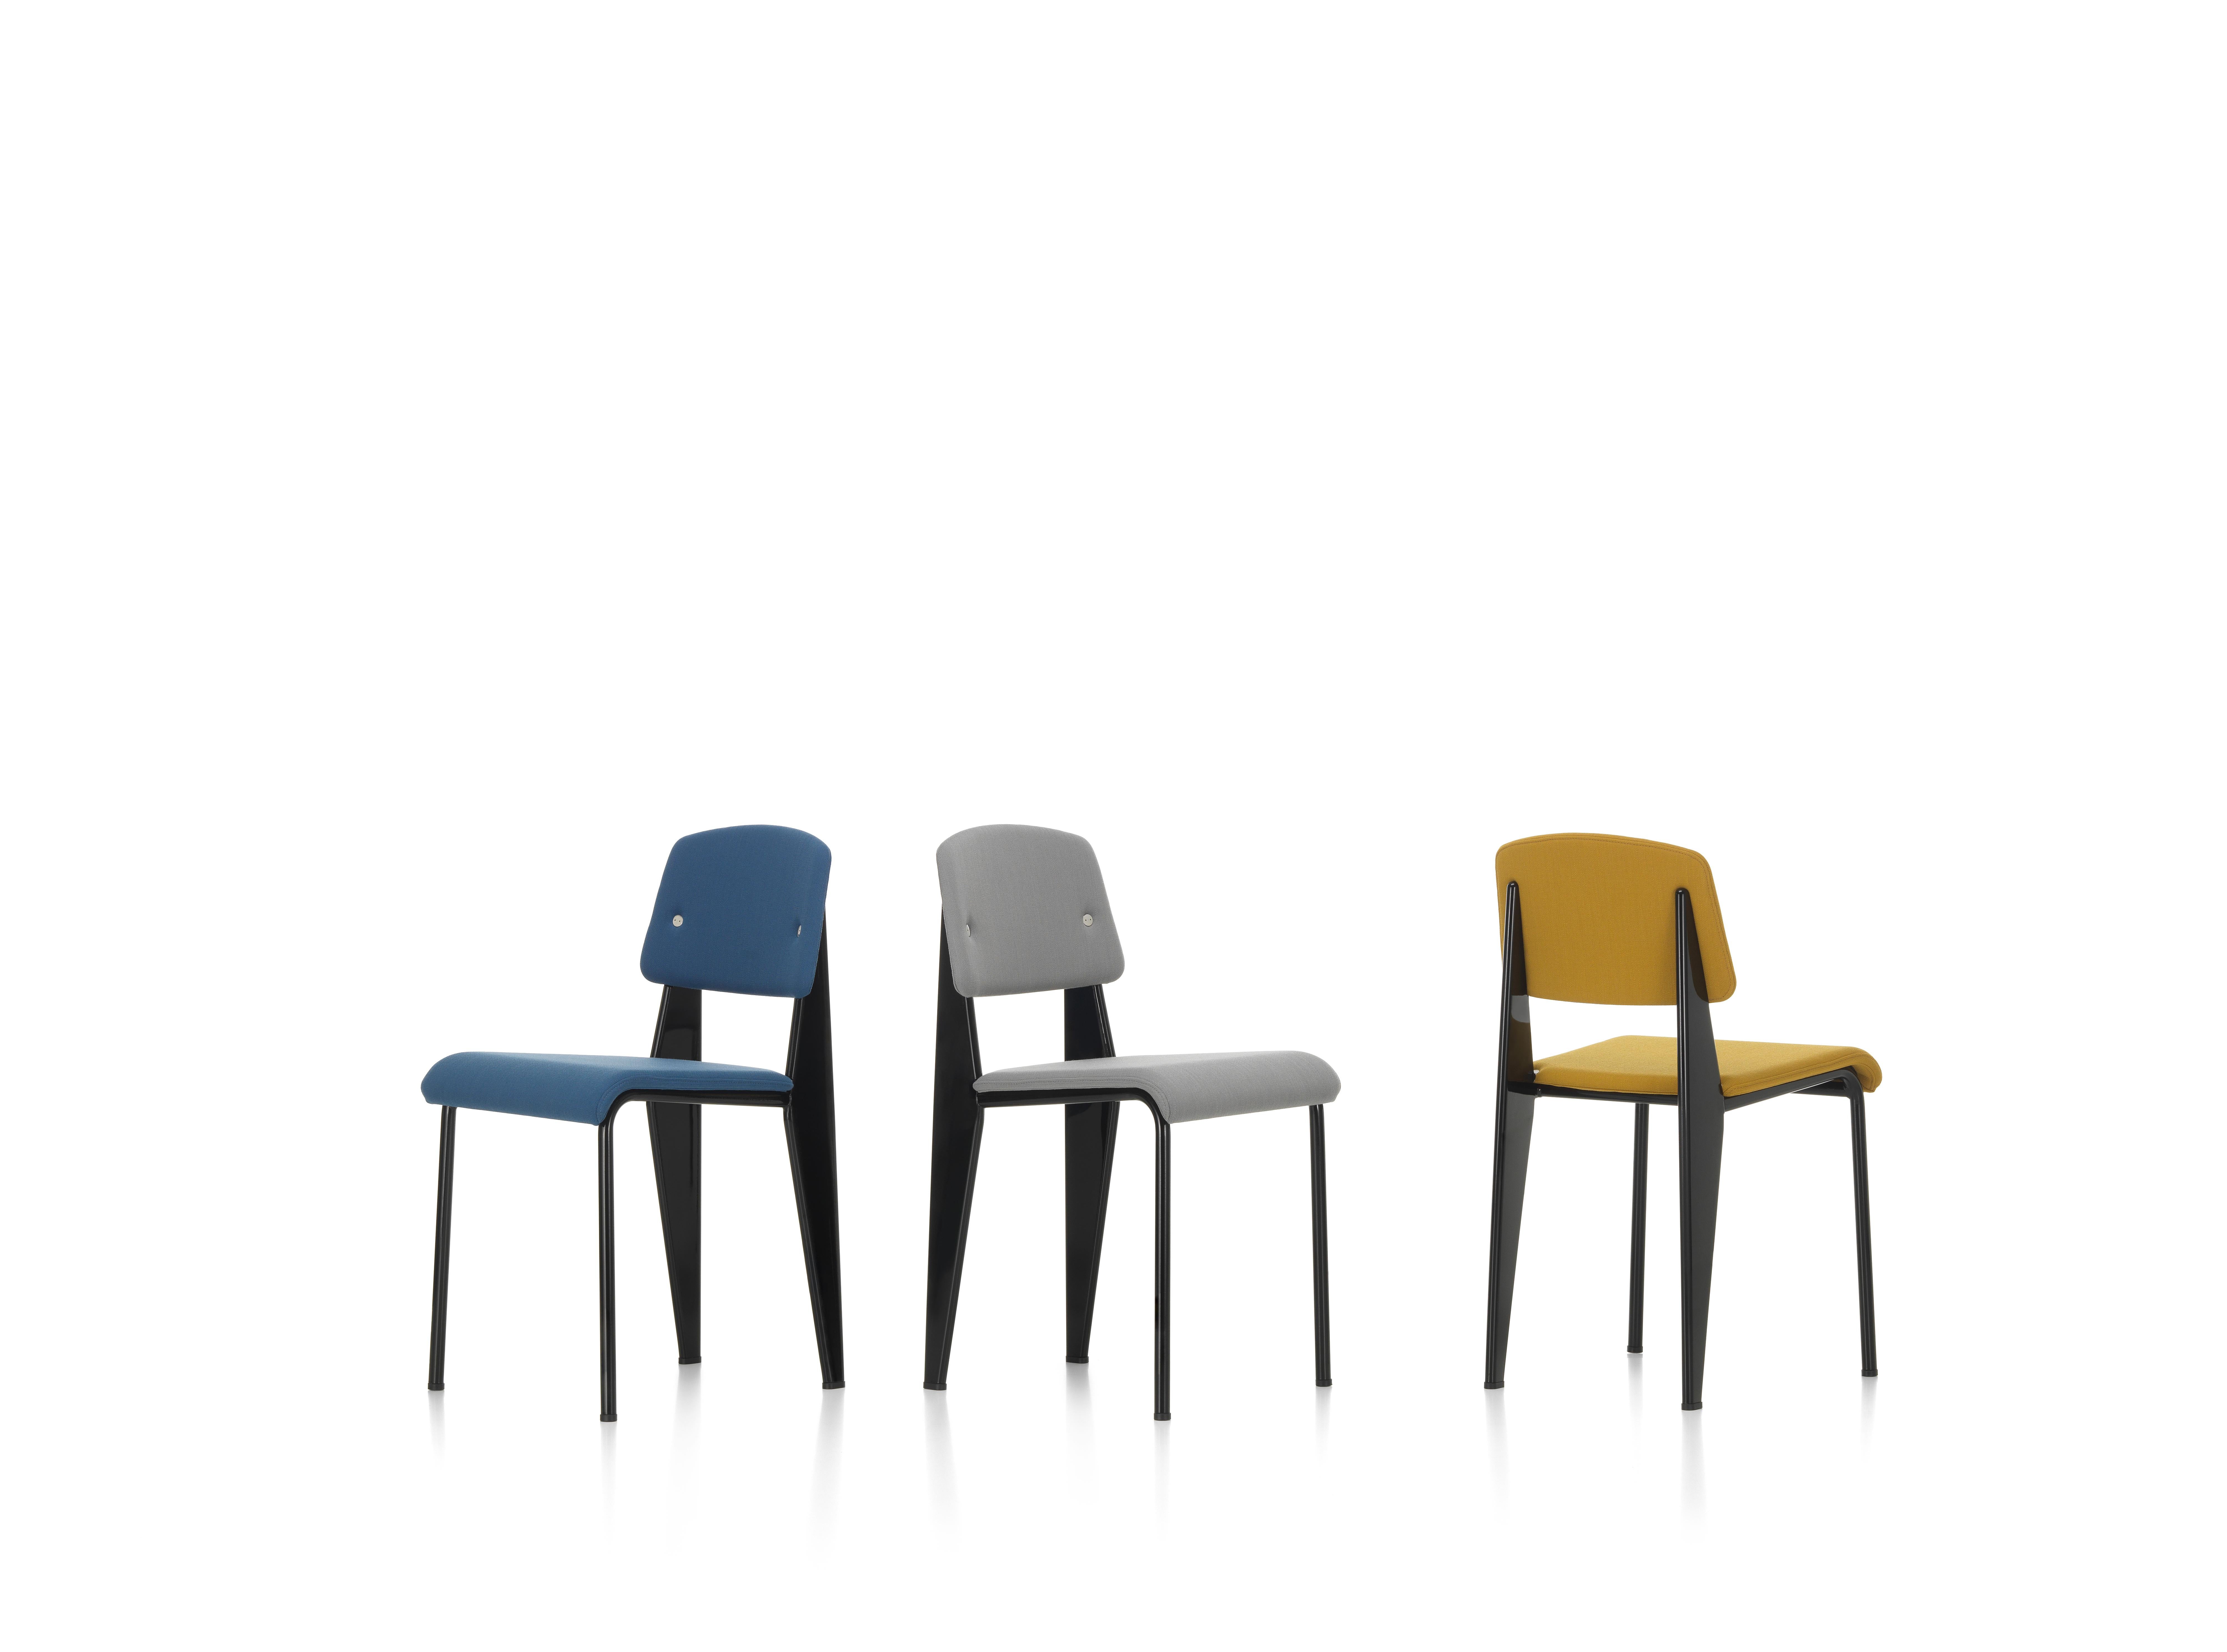 Swiss Vitra Standard SR Chair in Indigo and Deep Black by Jean Prouvé